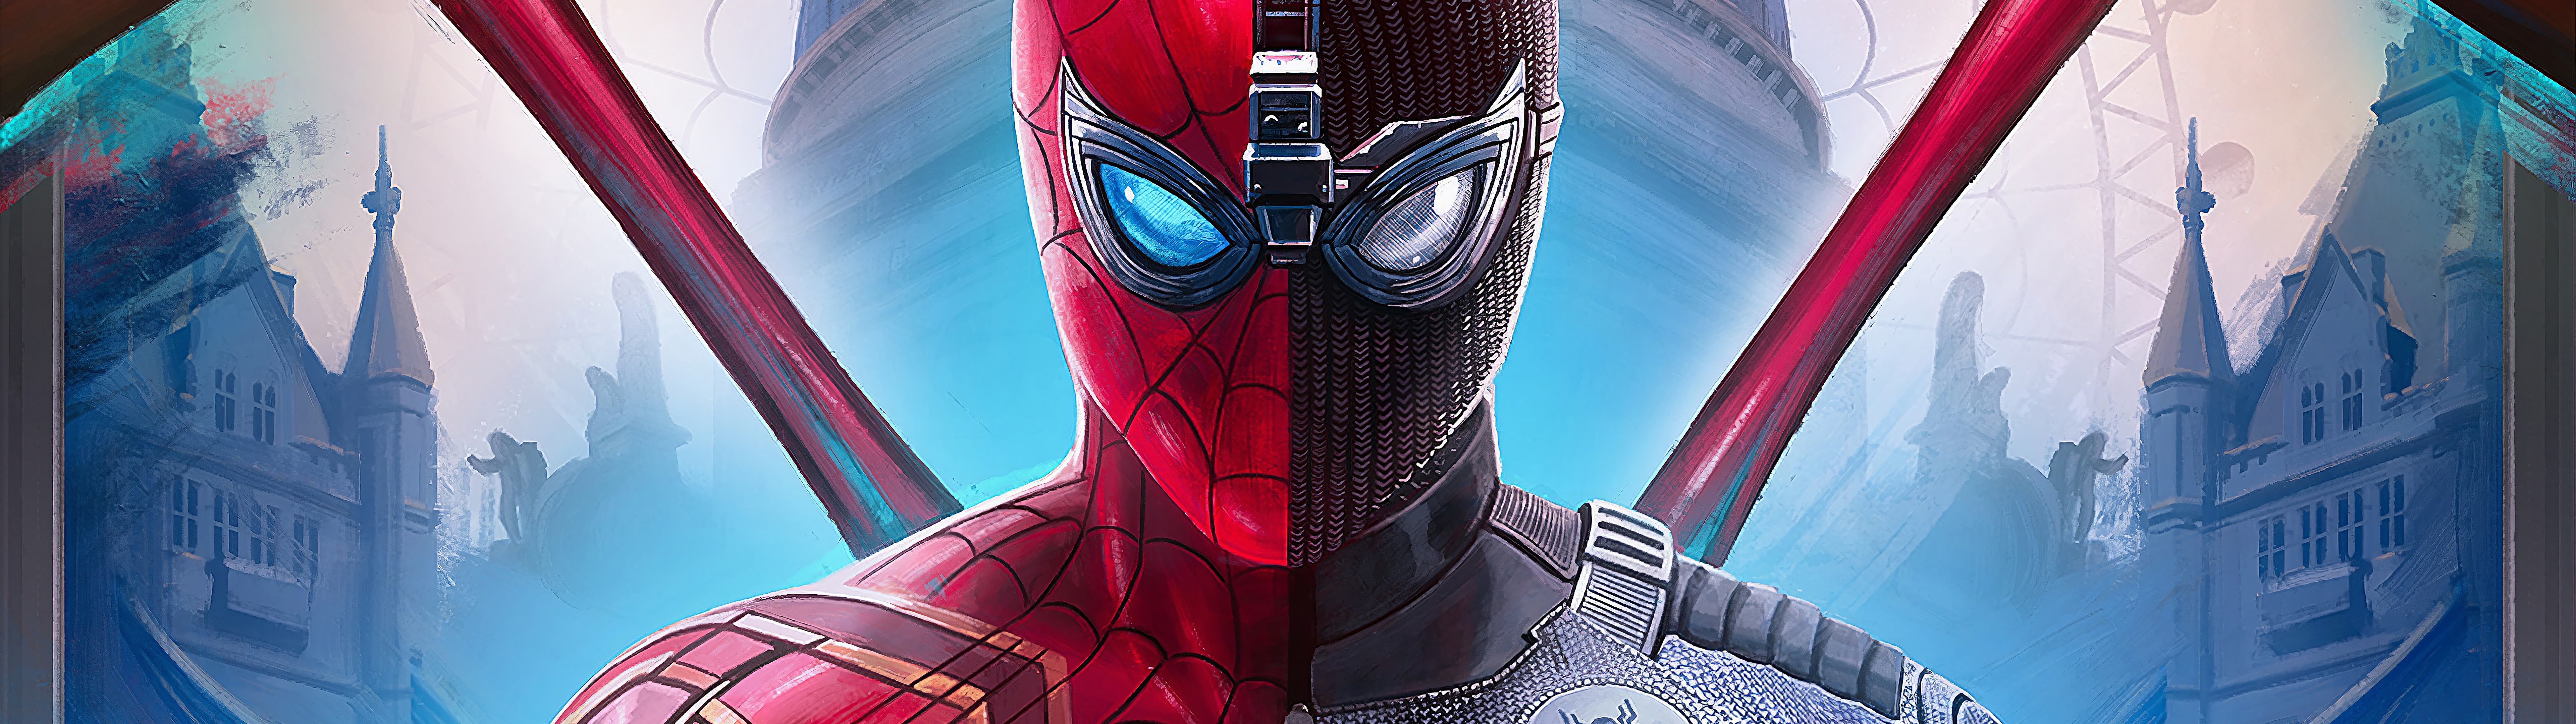 Spider-man Far From Home, Iron Spider, Stealth Suit, - Spider Man Far From Home - HD Wallpaper 